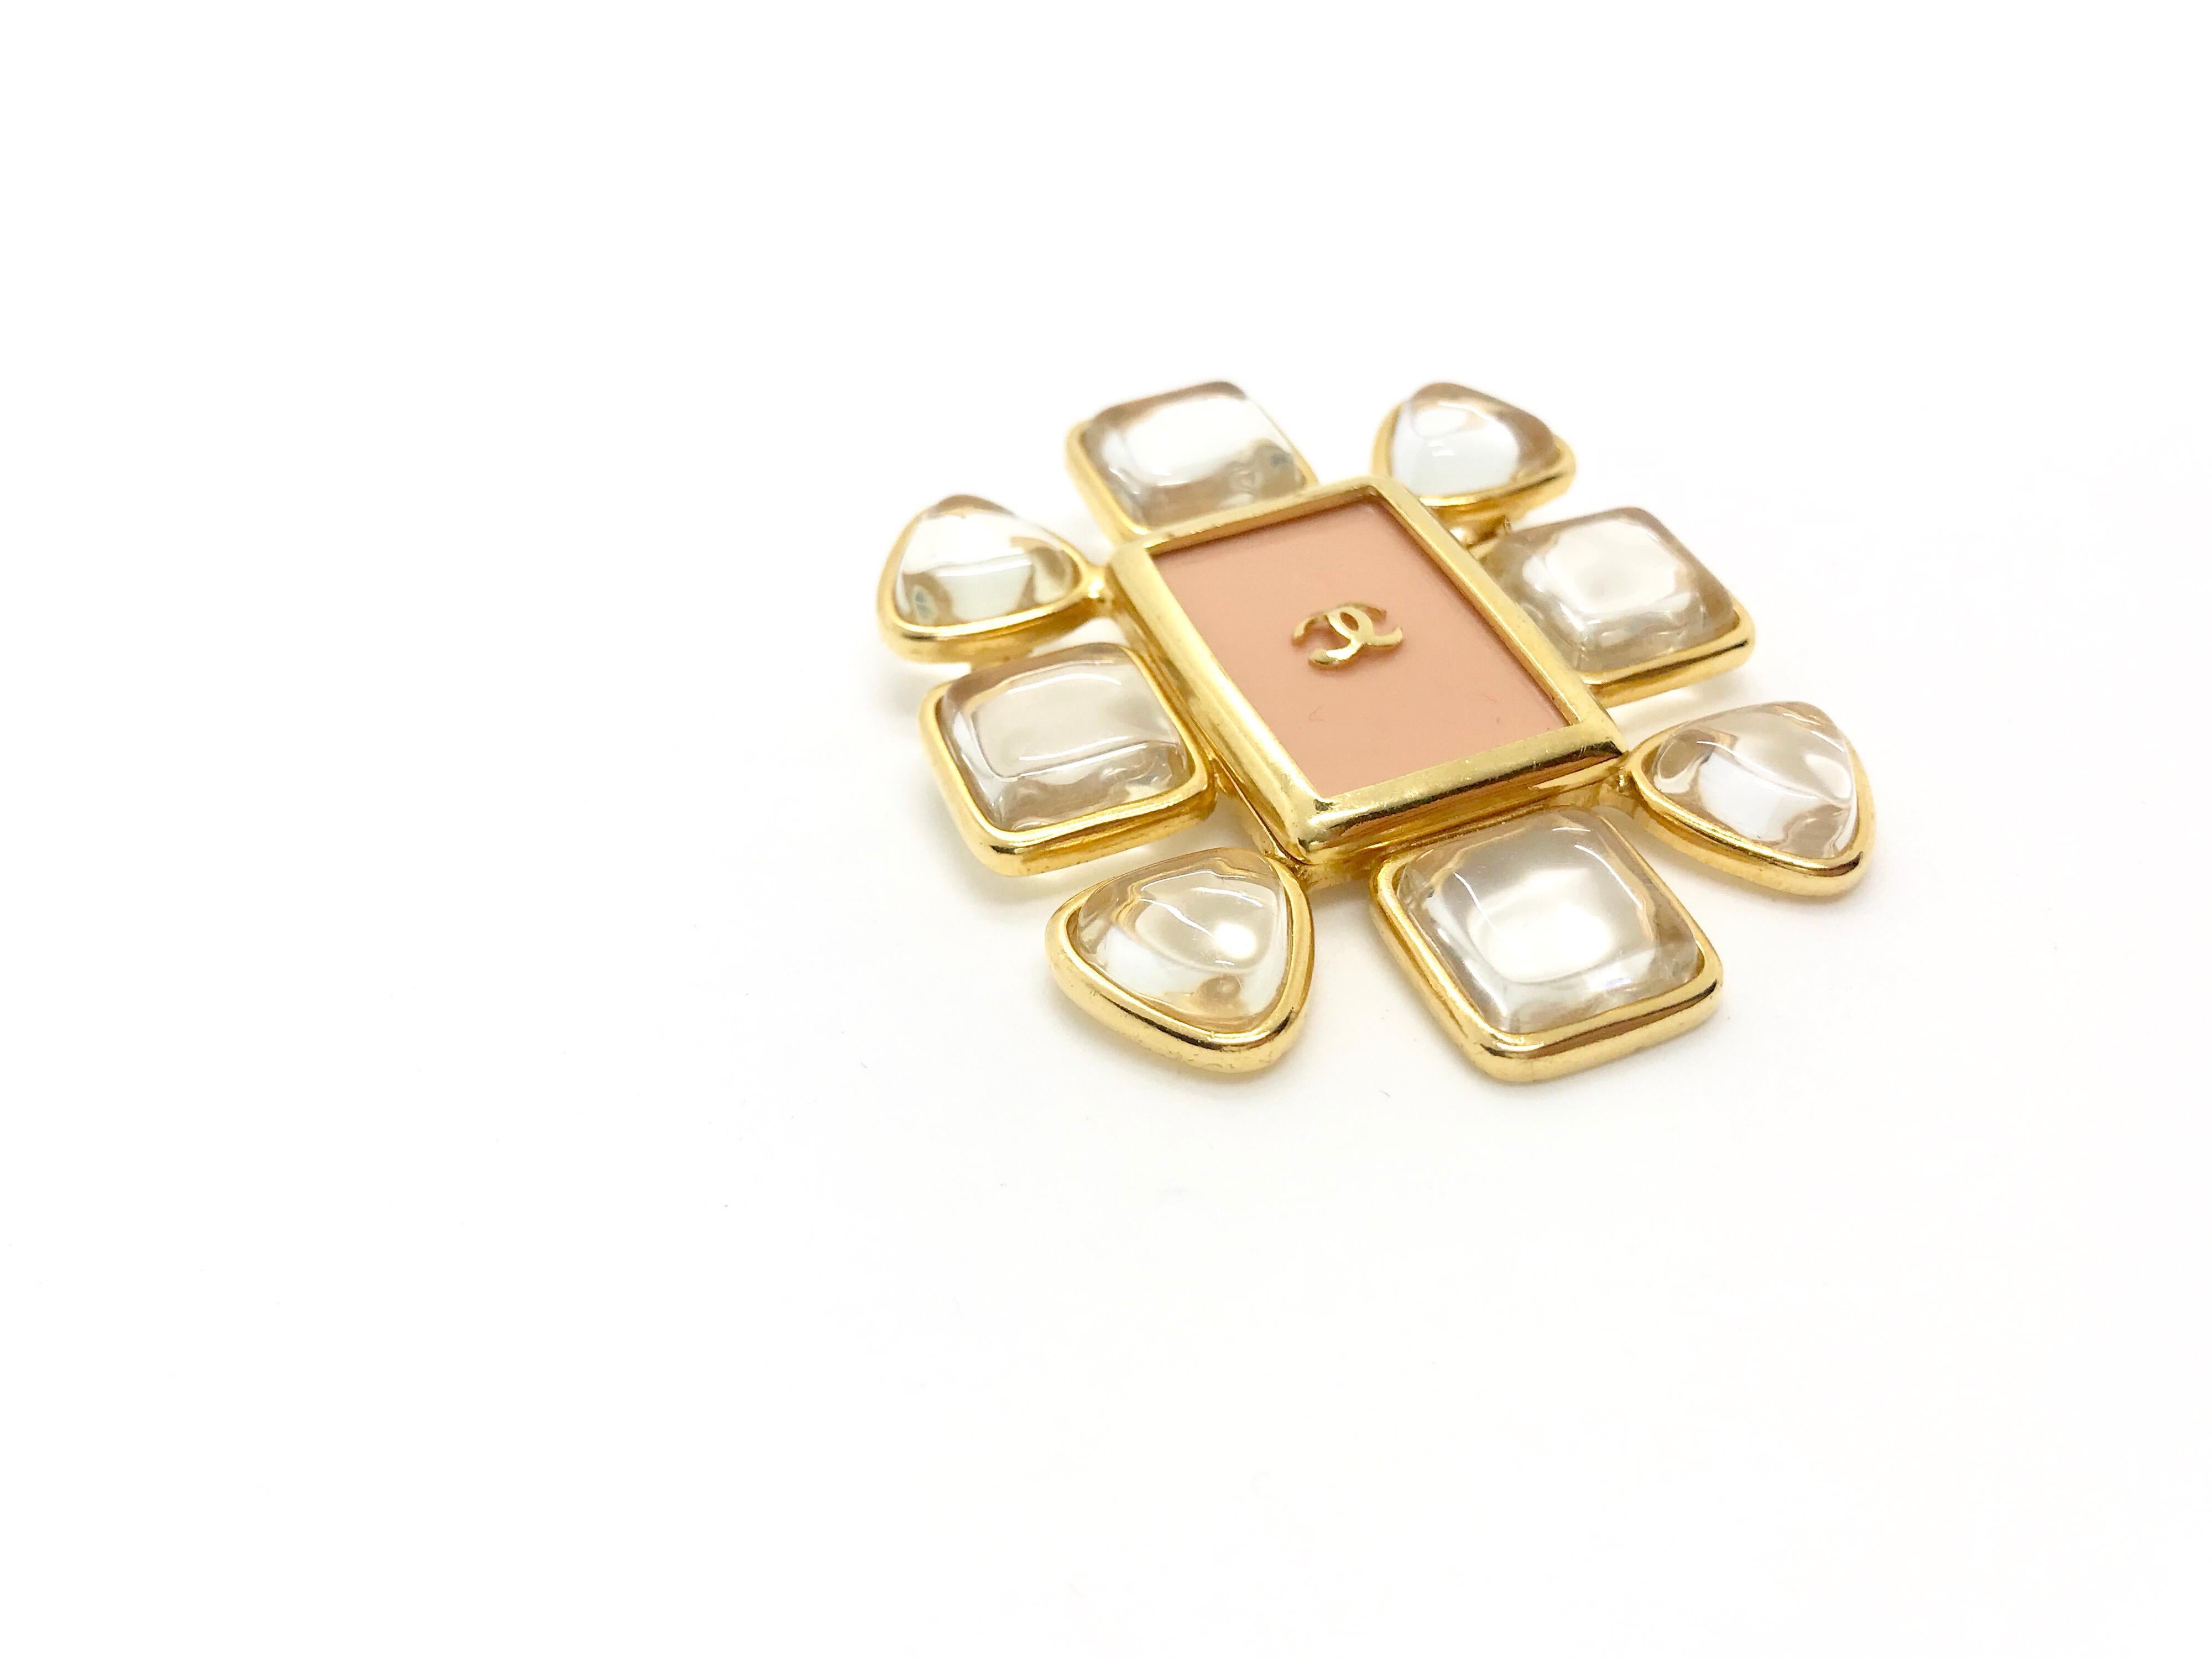 Chanel 1990s vintage brooch. Gold plated flower design with clear gripoix cabochons and pink lucite centre featuring CC logo.  

From the Spring / Summer 1996 Collection.  

Marked CHANEL 96 P Made in France on reverse. 

height approx. 6.7 cm (2.64